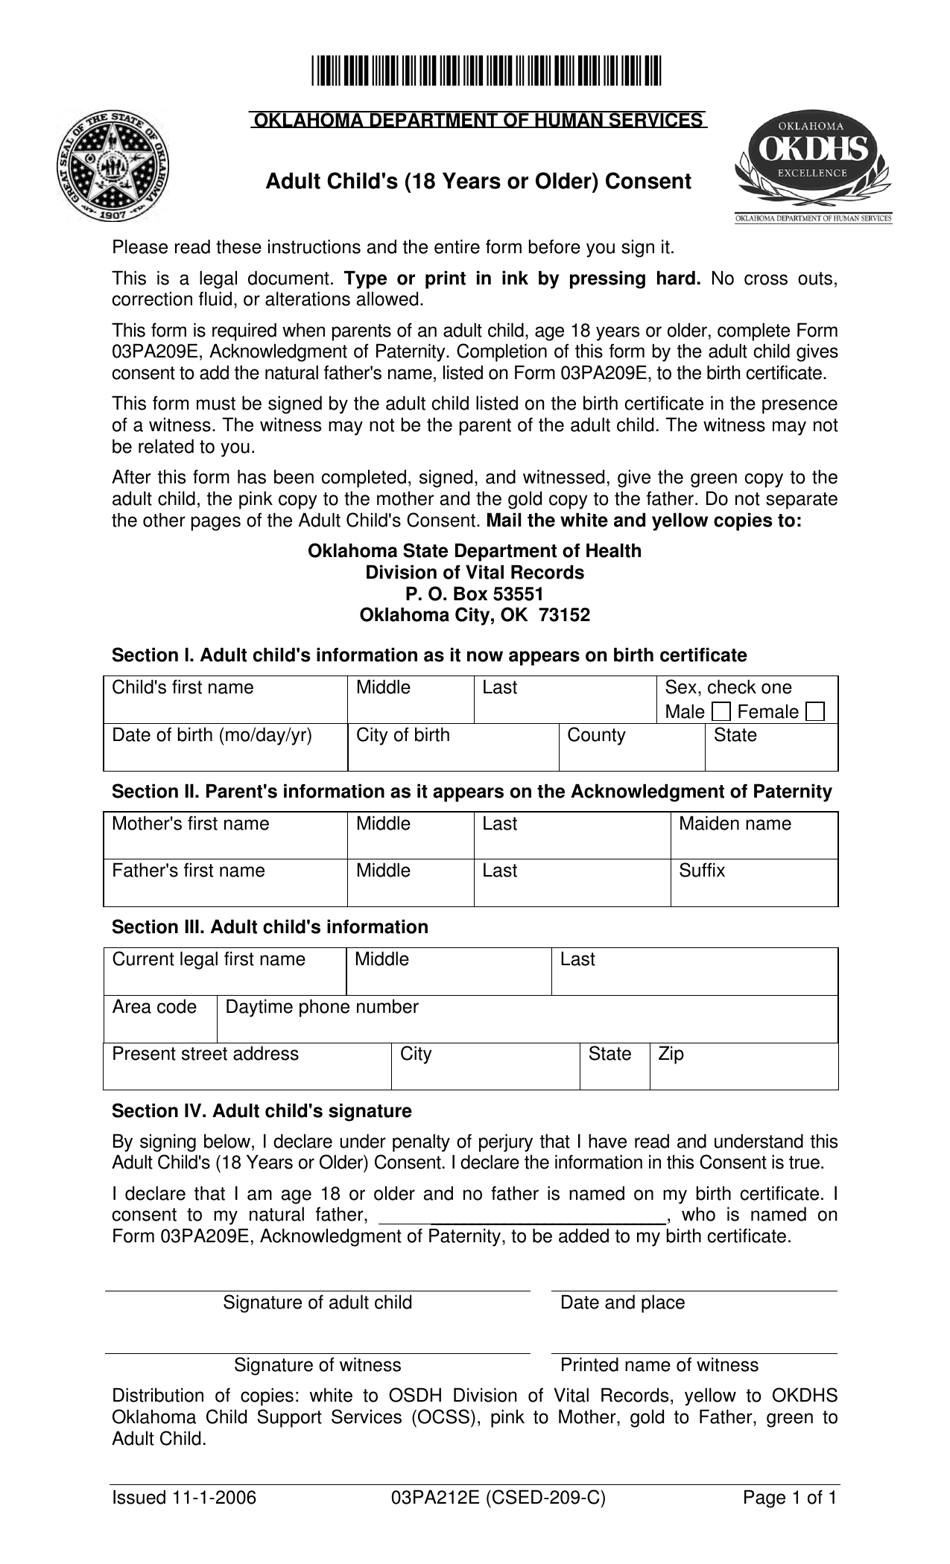 Form 03PA212E Adult Childs (18 Years or Older) Consent - Oklahoma, Page 1